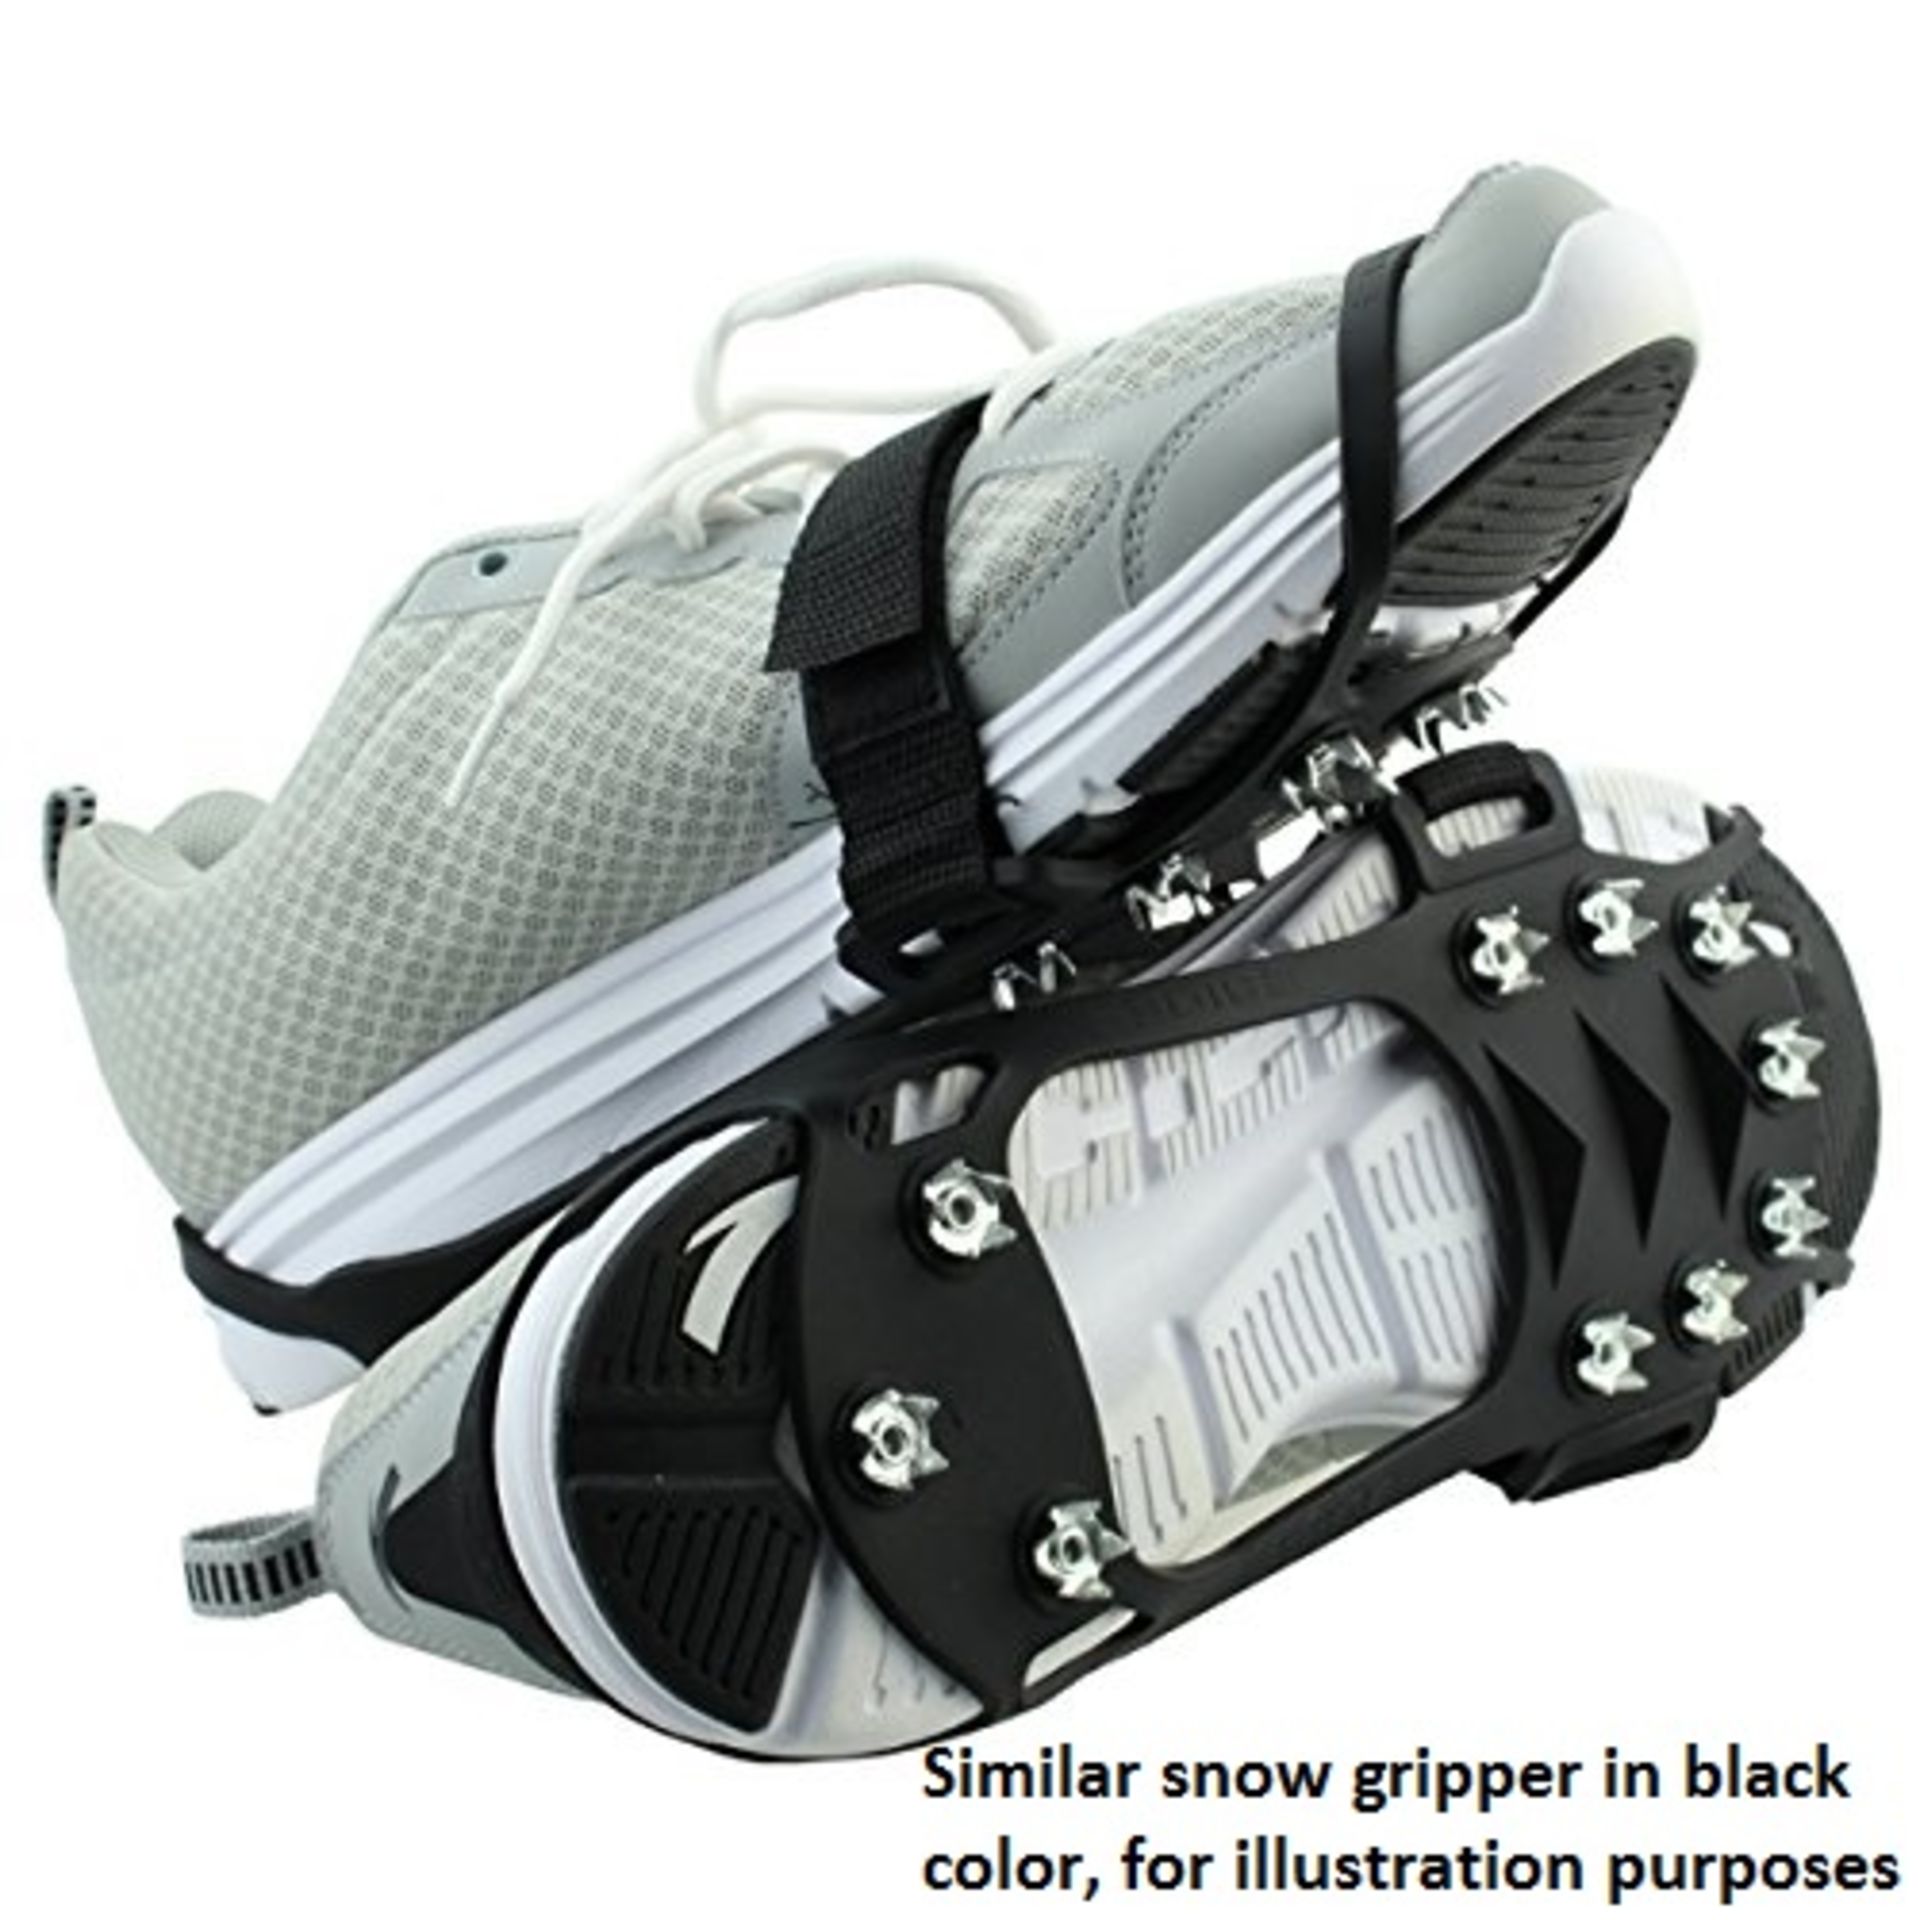 50x Red Premium Full Foot Snow Grippers - Image 5 of 5